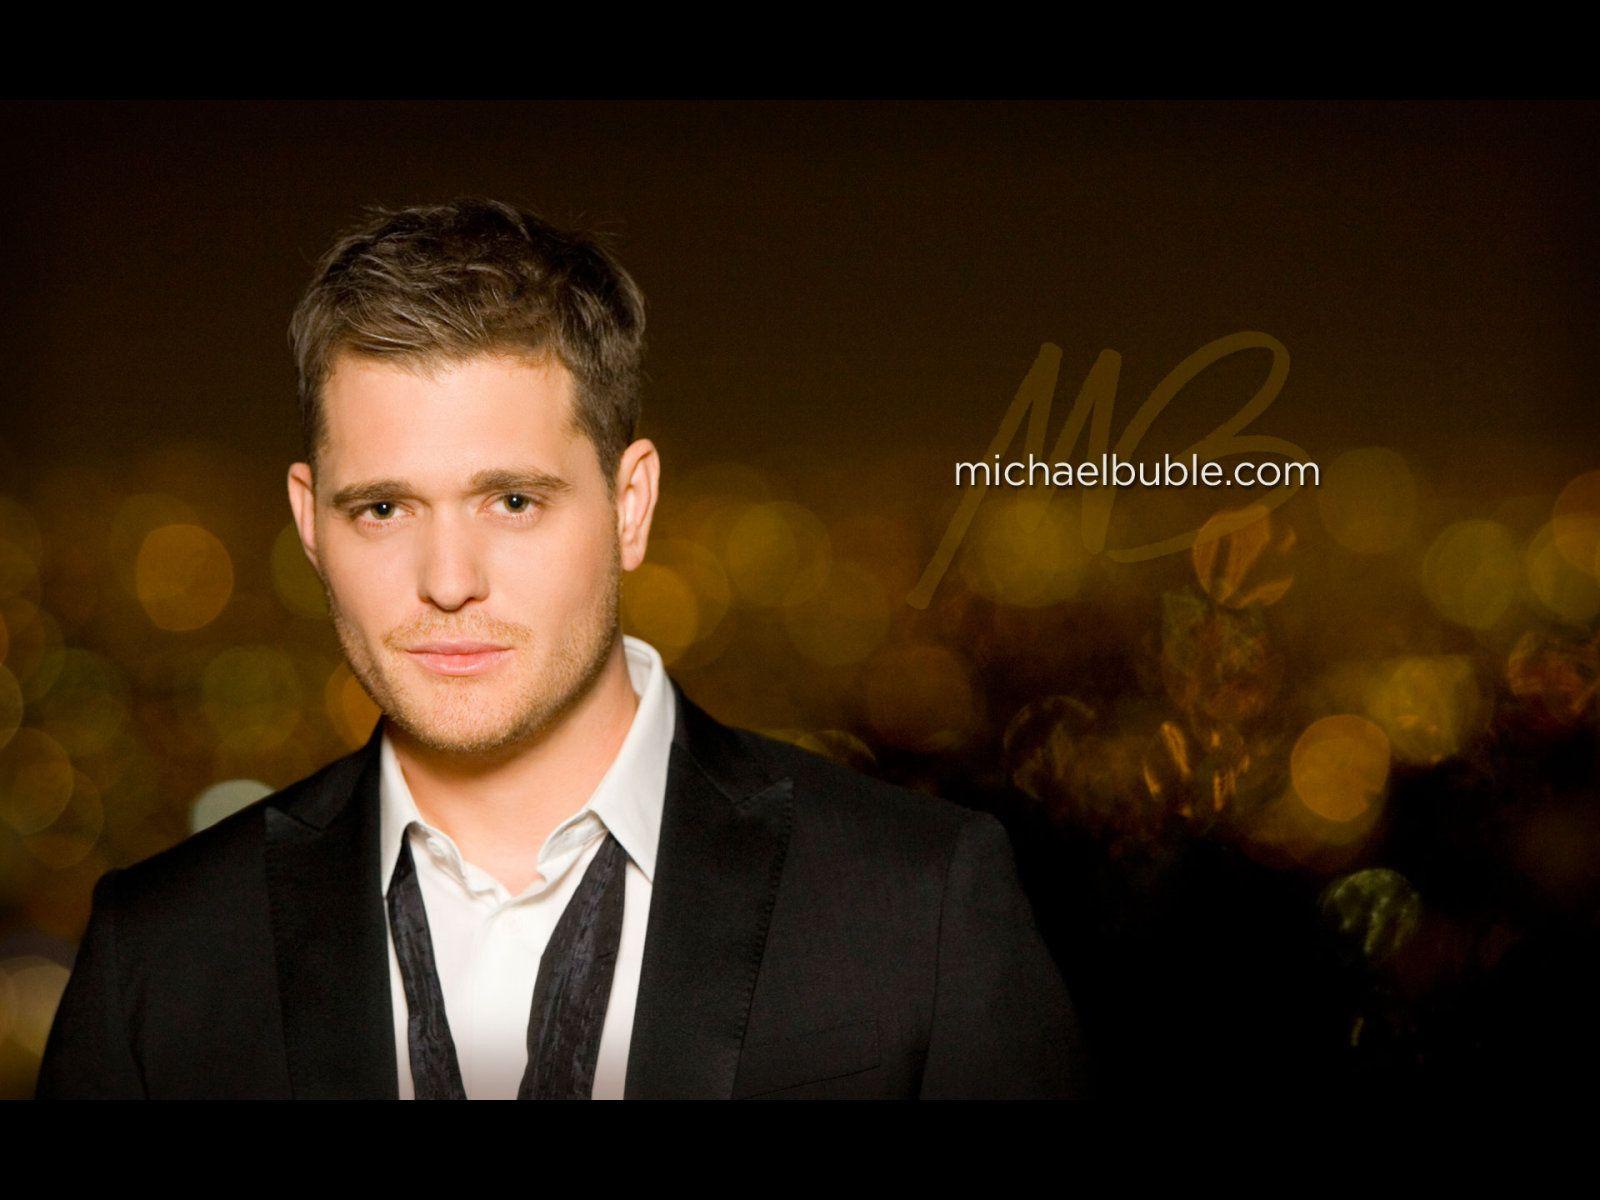 Michael Buble Wallpapers.